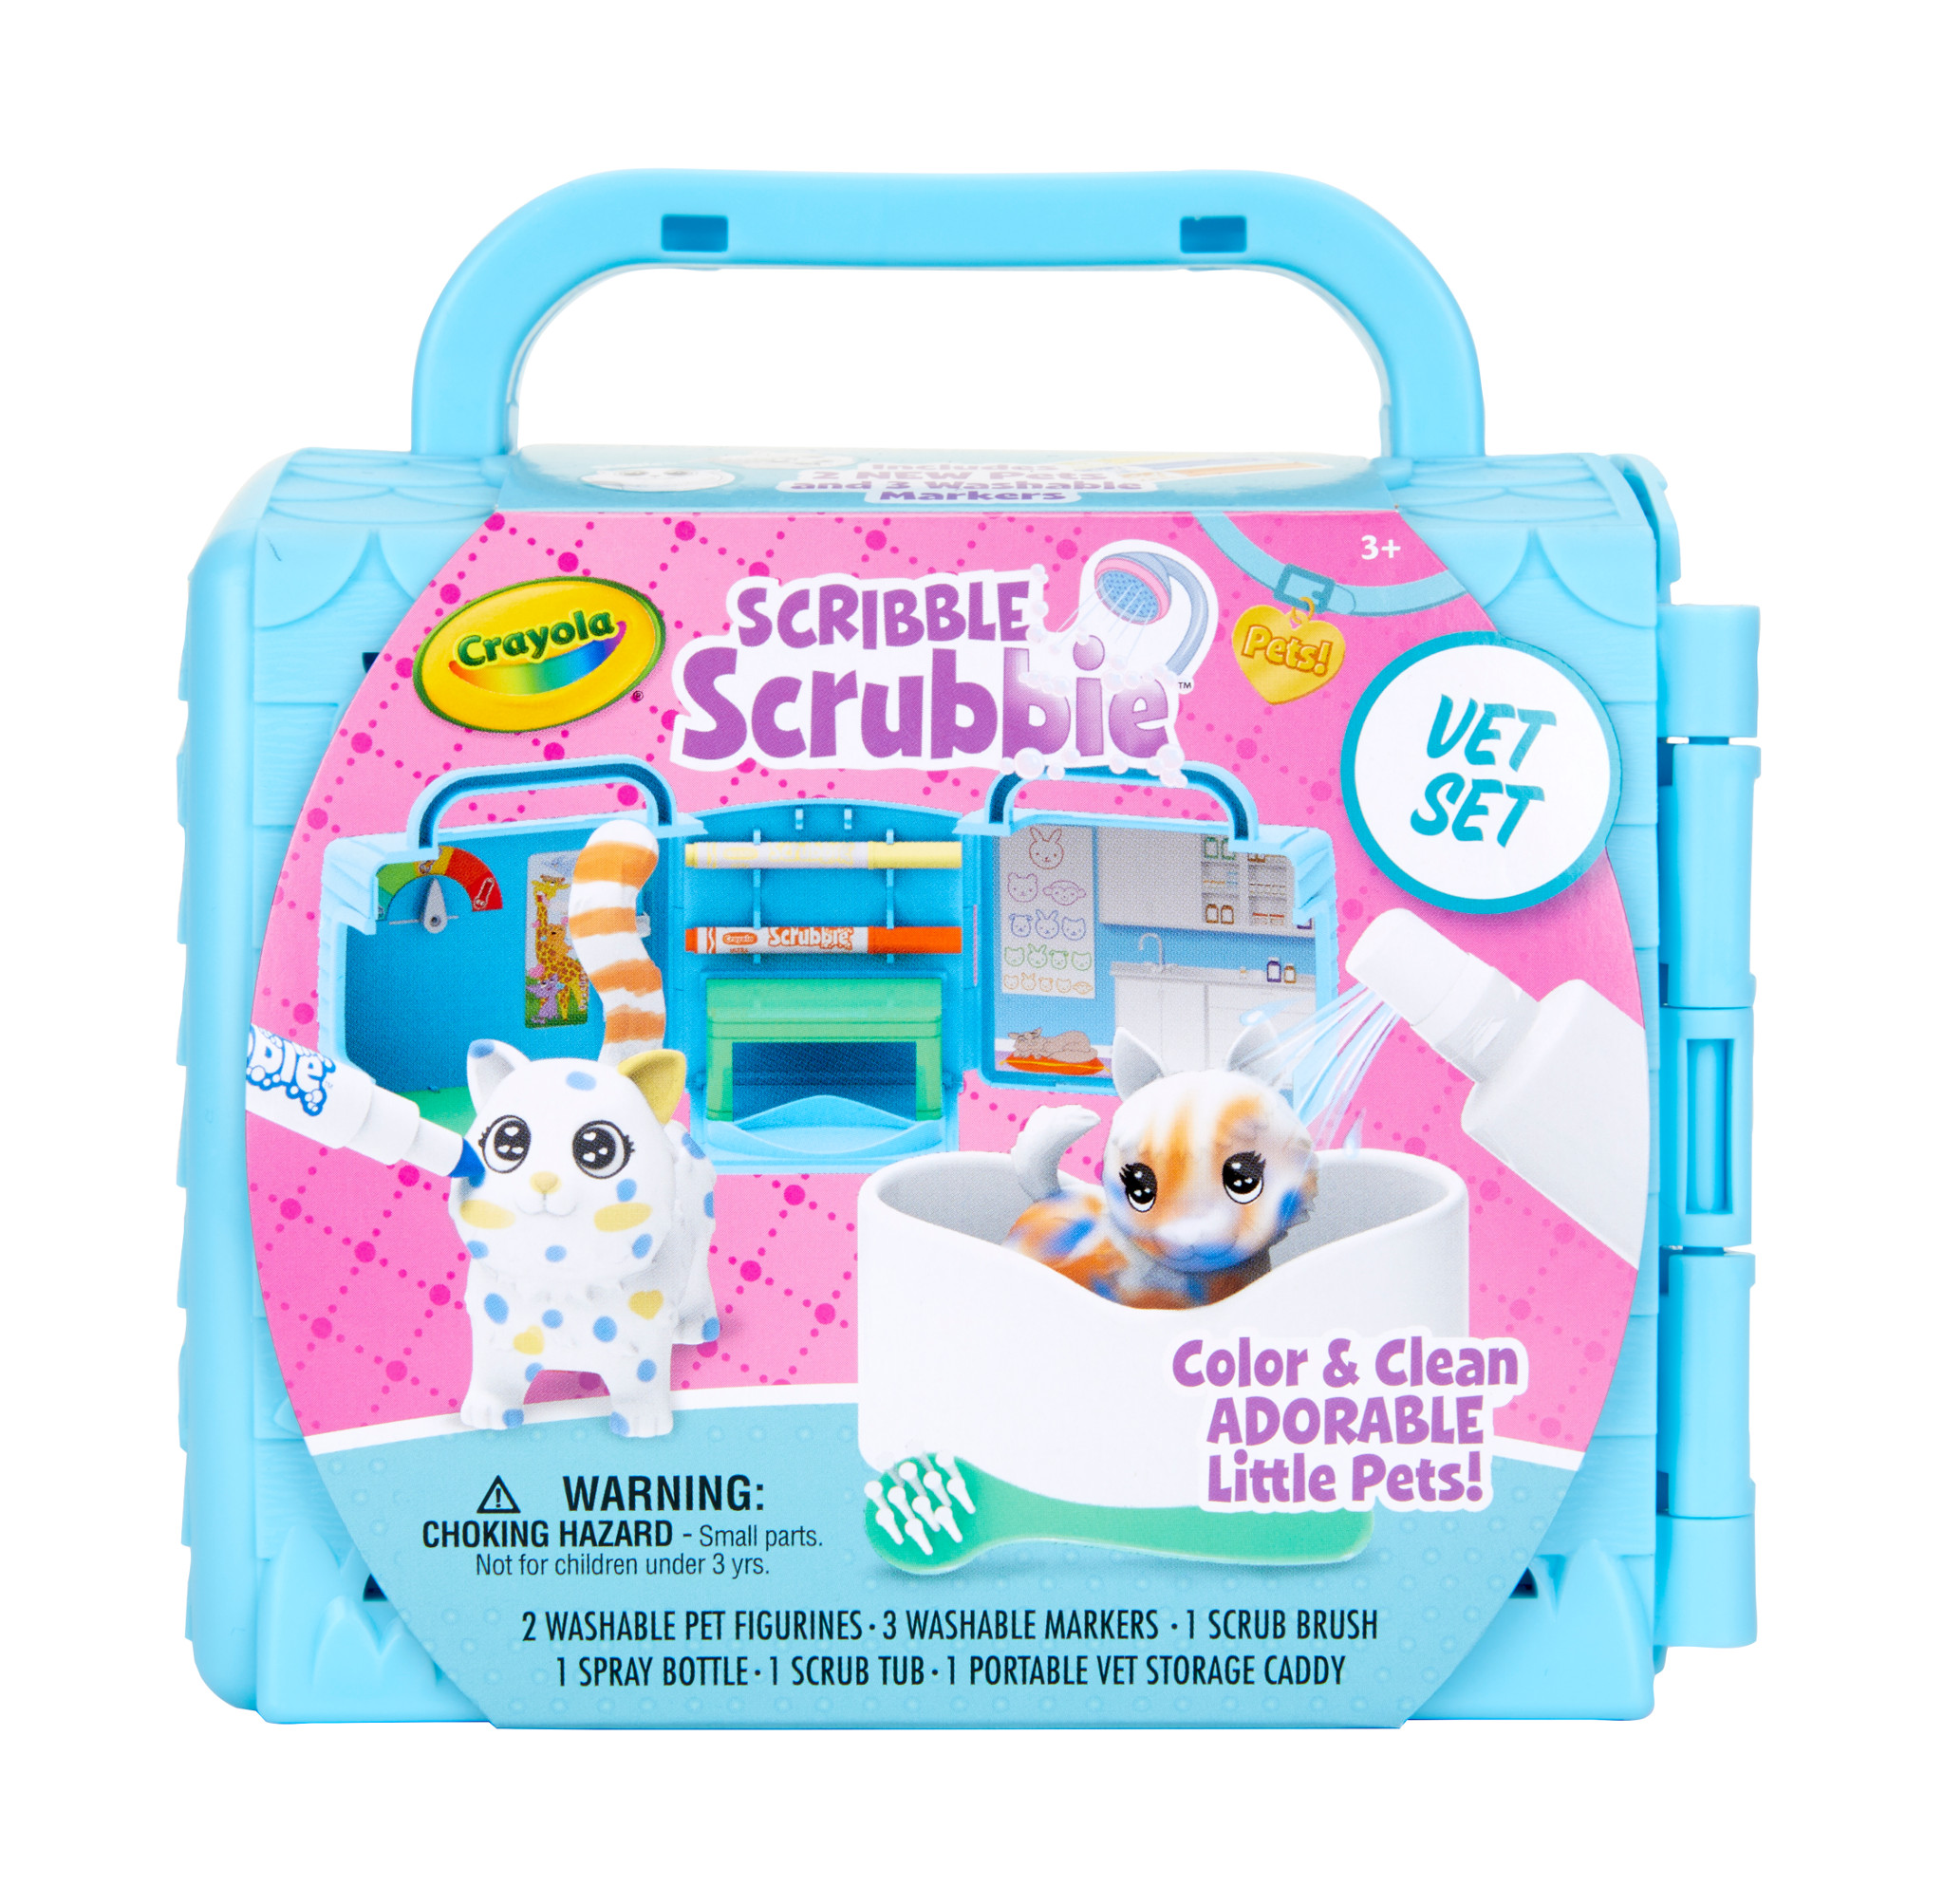 Crayola Scribble Scrubbie Pets Vet Set 6 Piece Set Boys and Girls Ages 3+ - image 5 of 9